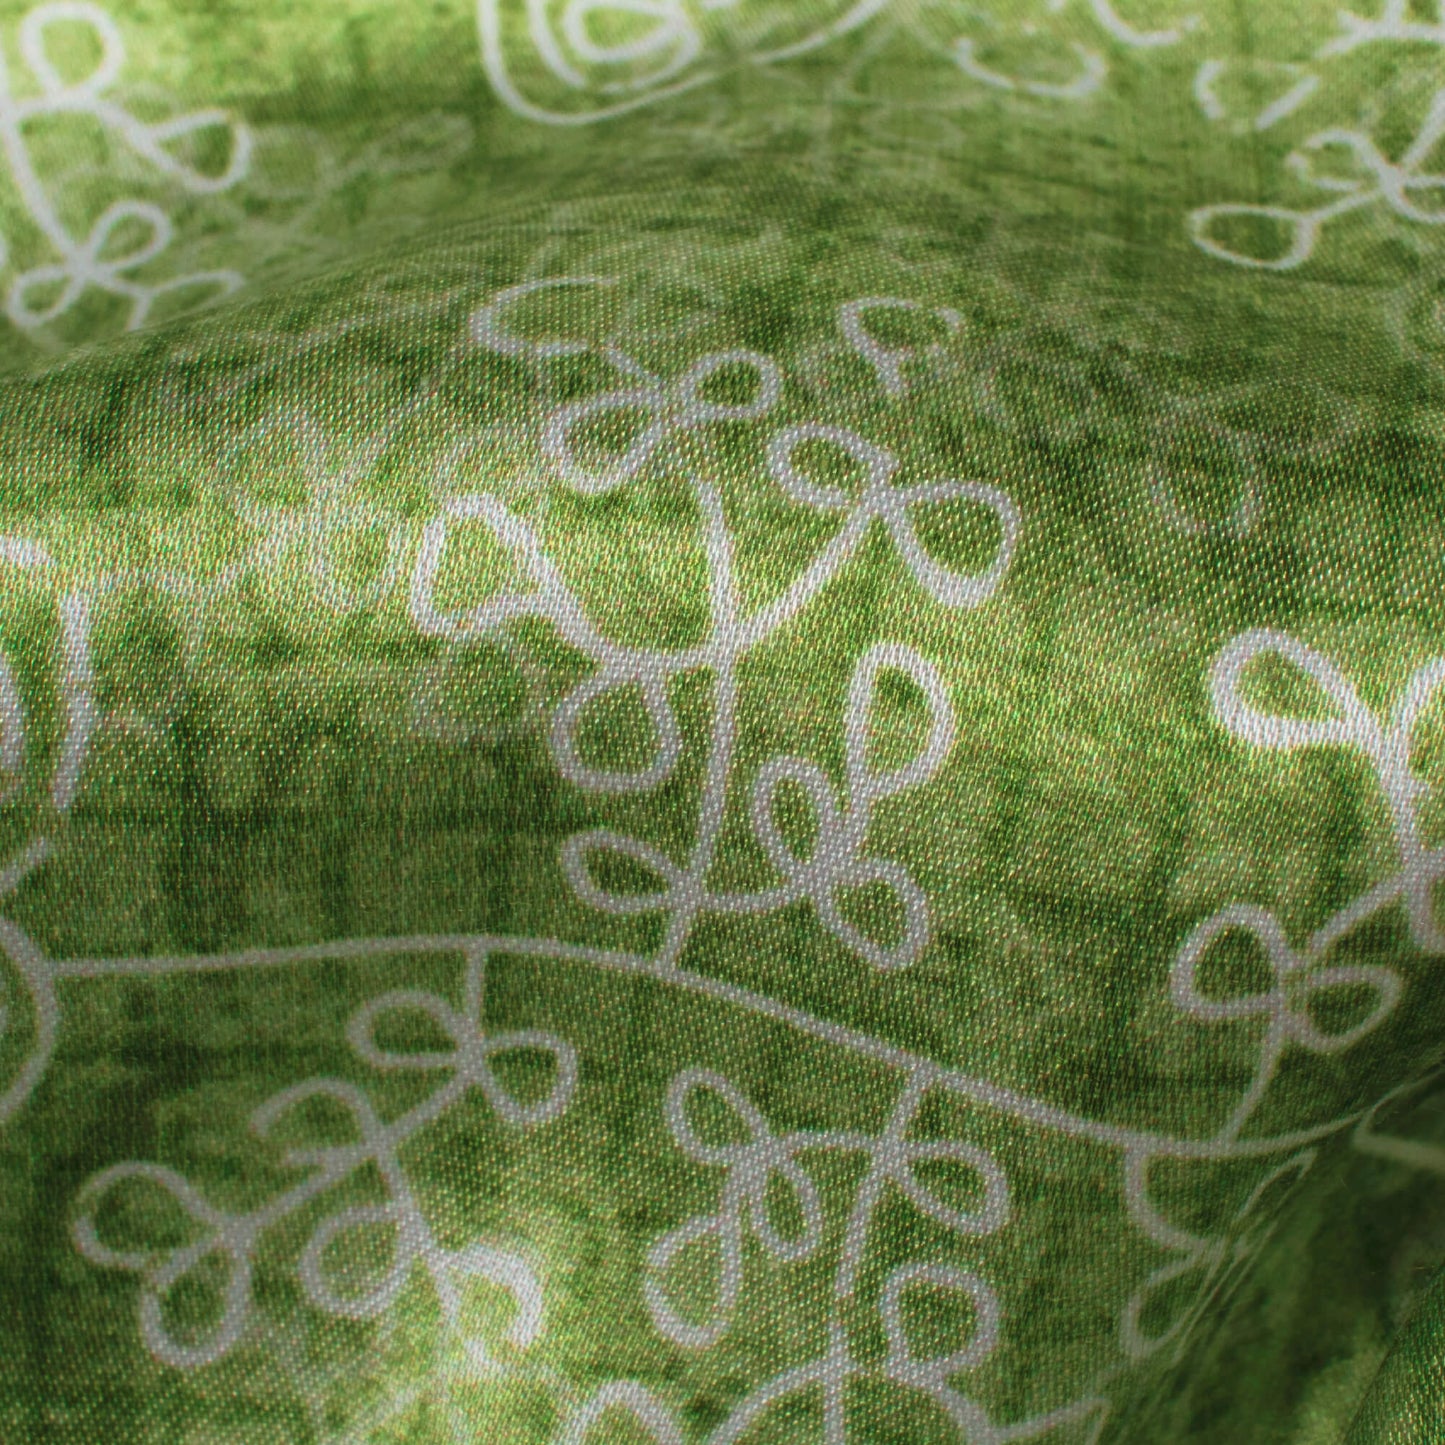 Fern Green And White Floral Pattern Digital Print Japan Satin Fabric